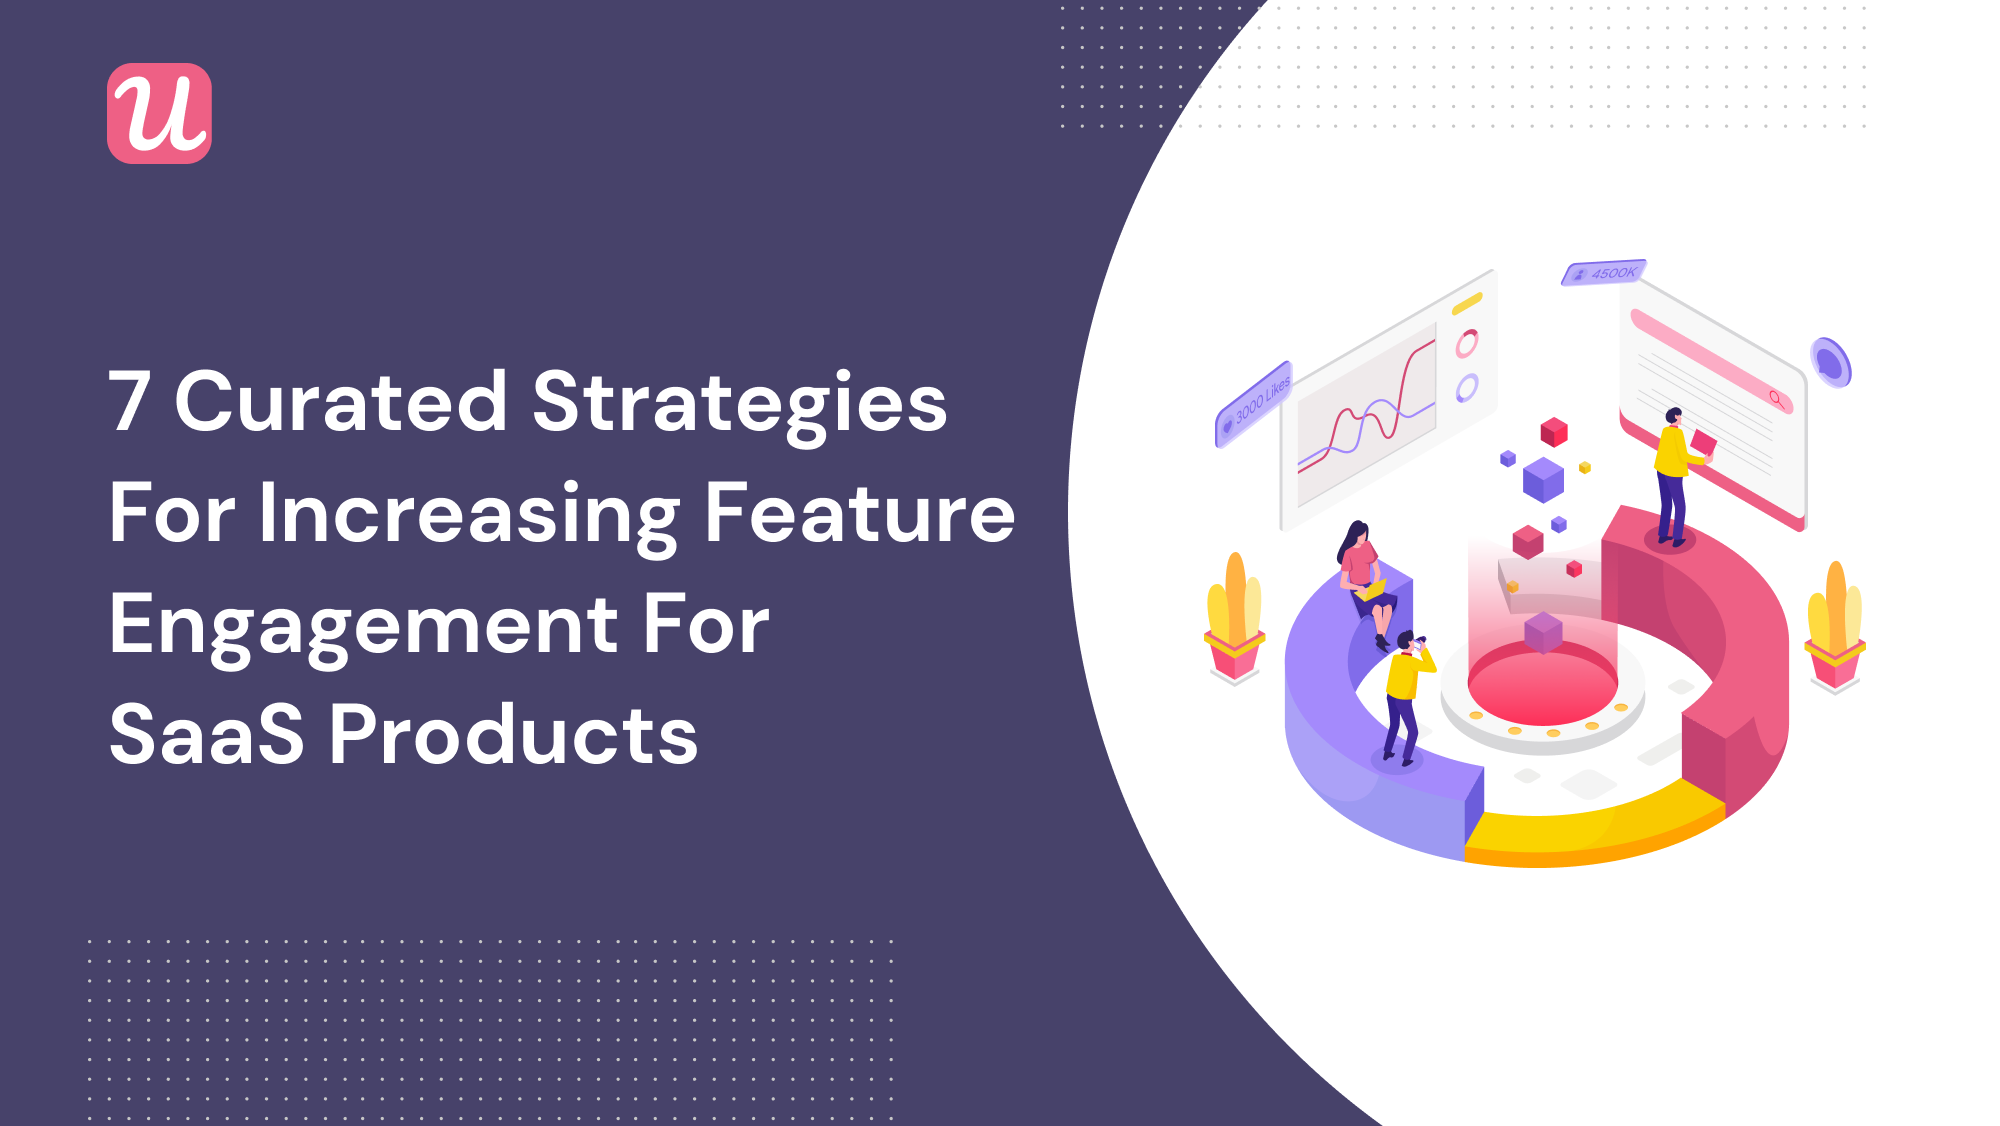 7-Curated-Strategies-For-Increasing Feature-Engagement-For-SaaS-Products